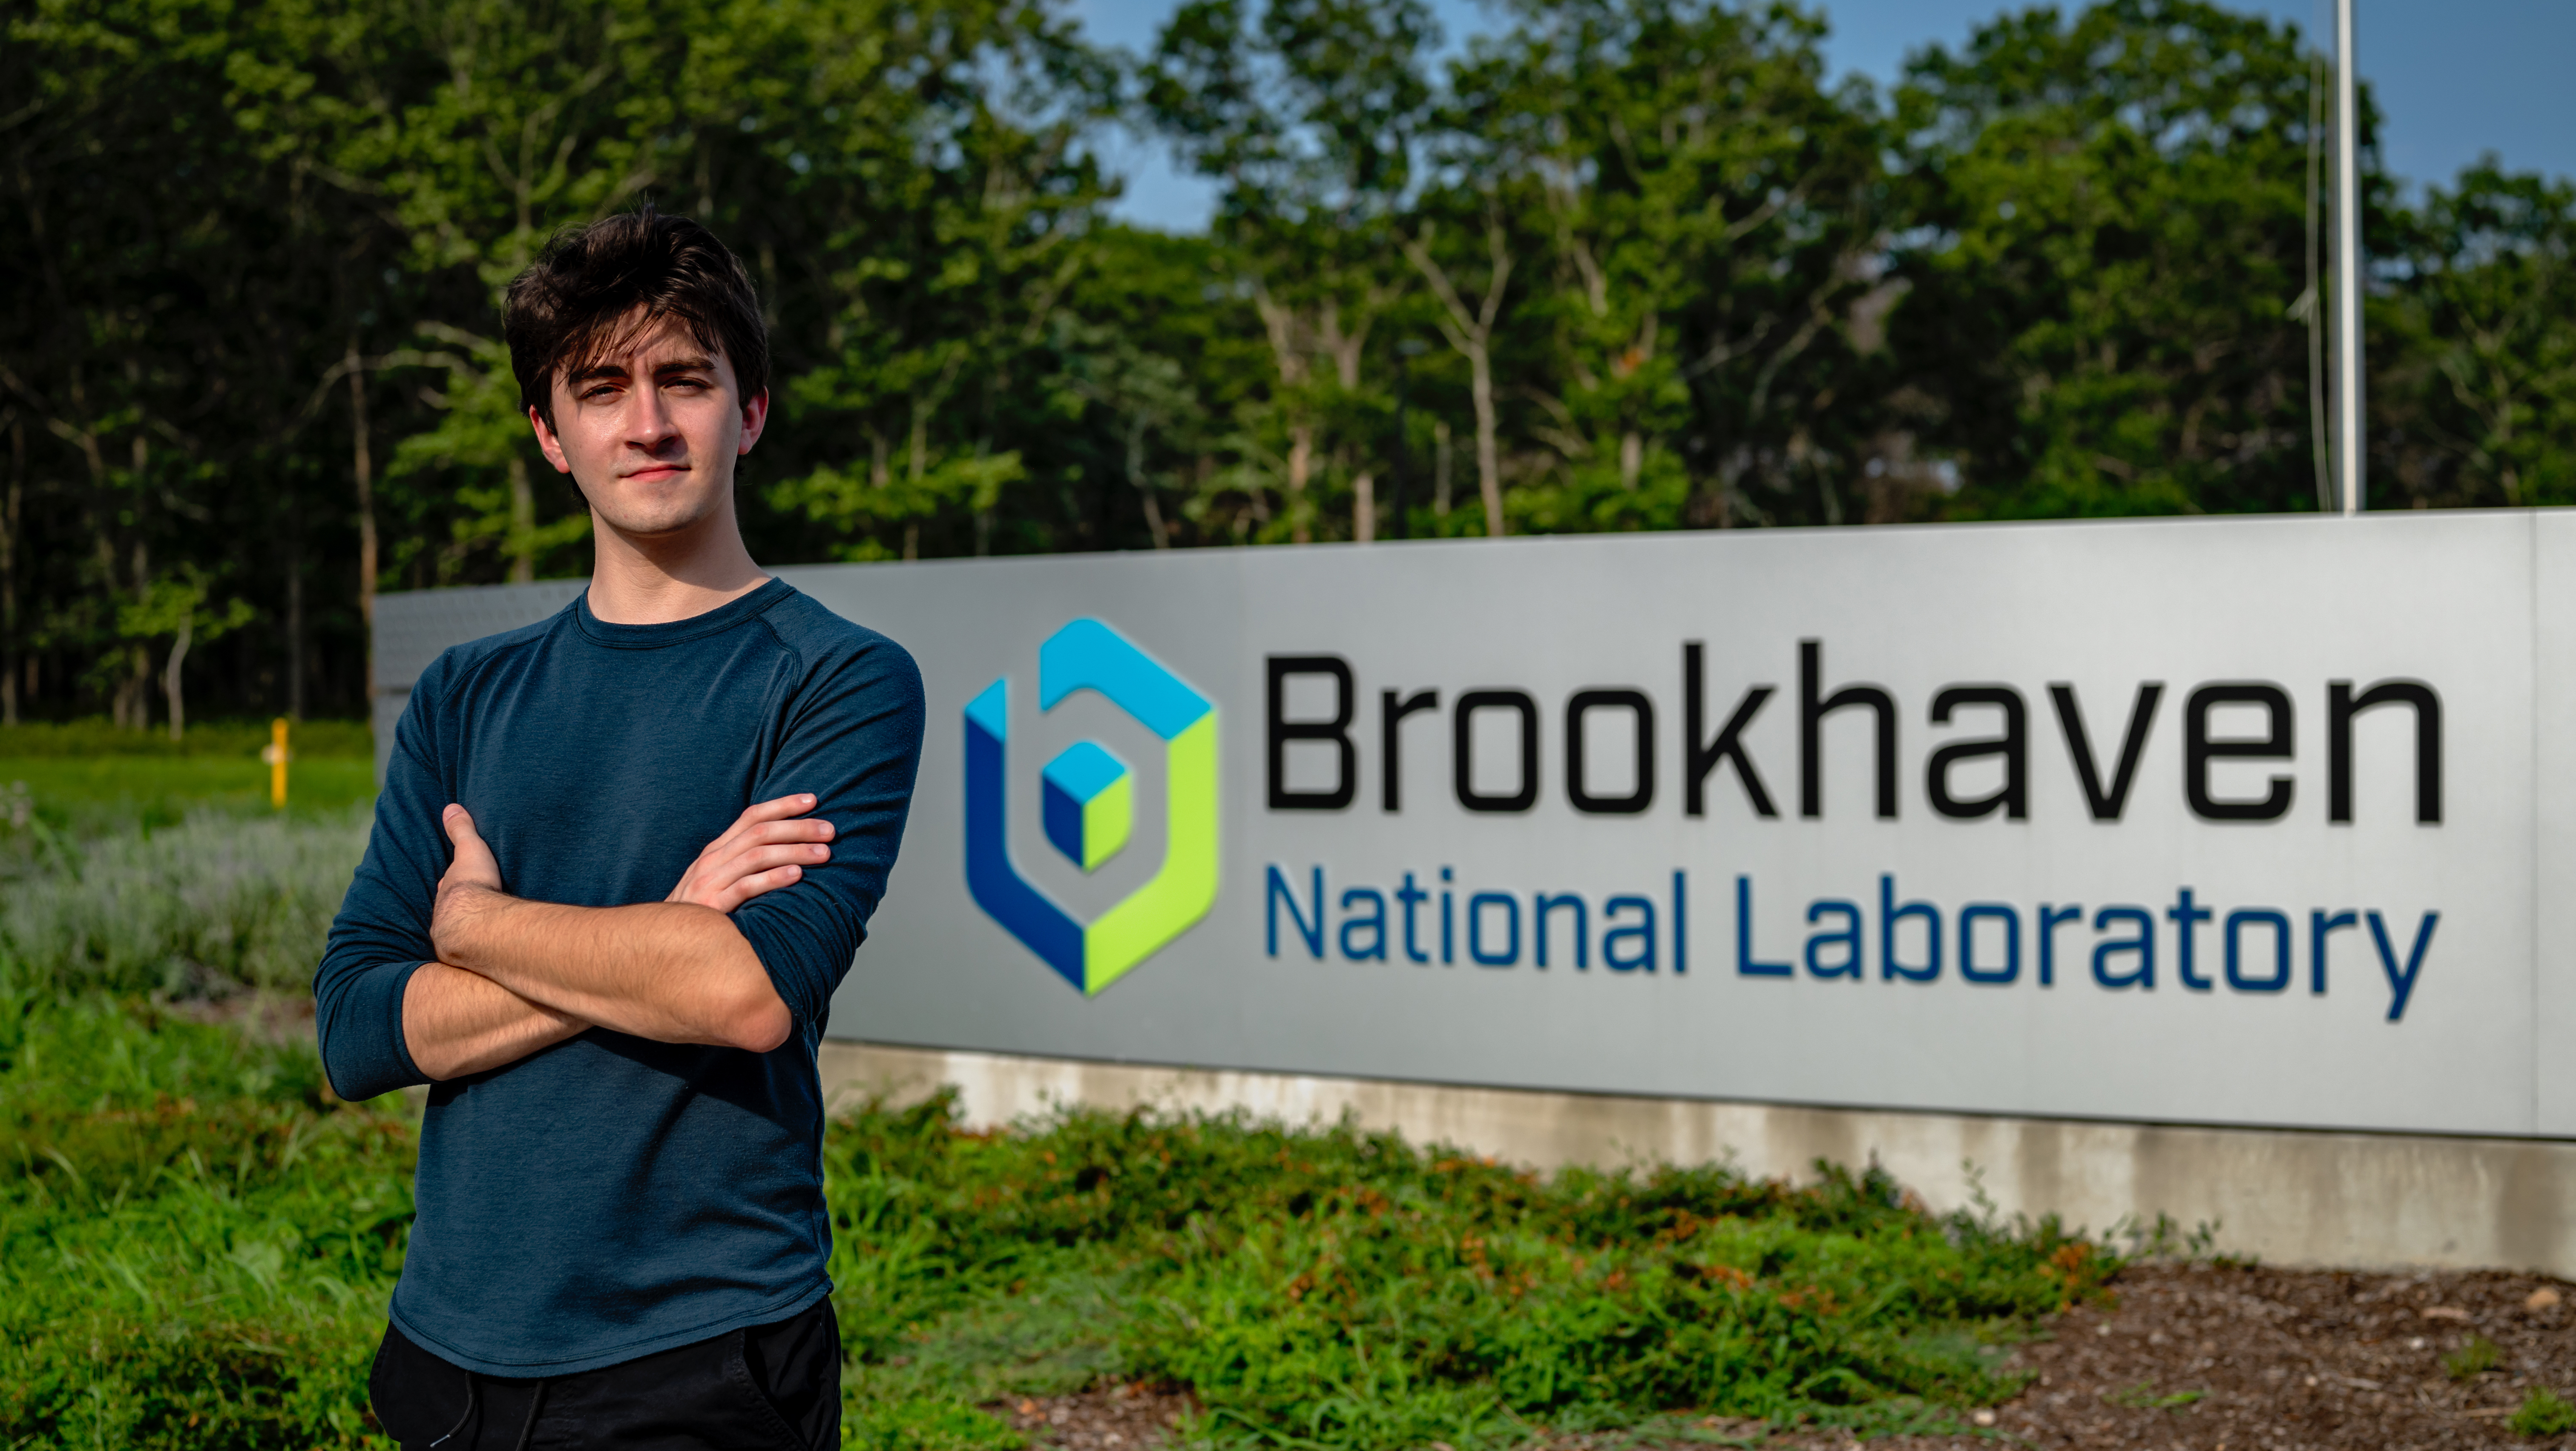 Undergraduate Student's Life-Changing Summer Internship at Brookhaven  Building Neural Networks